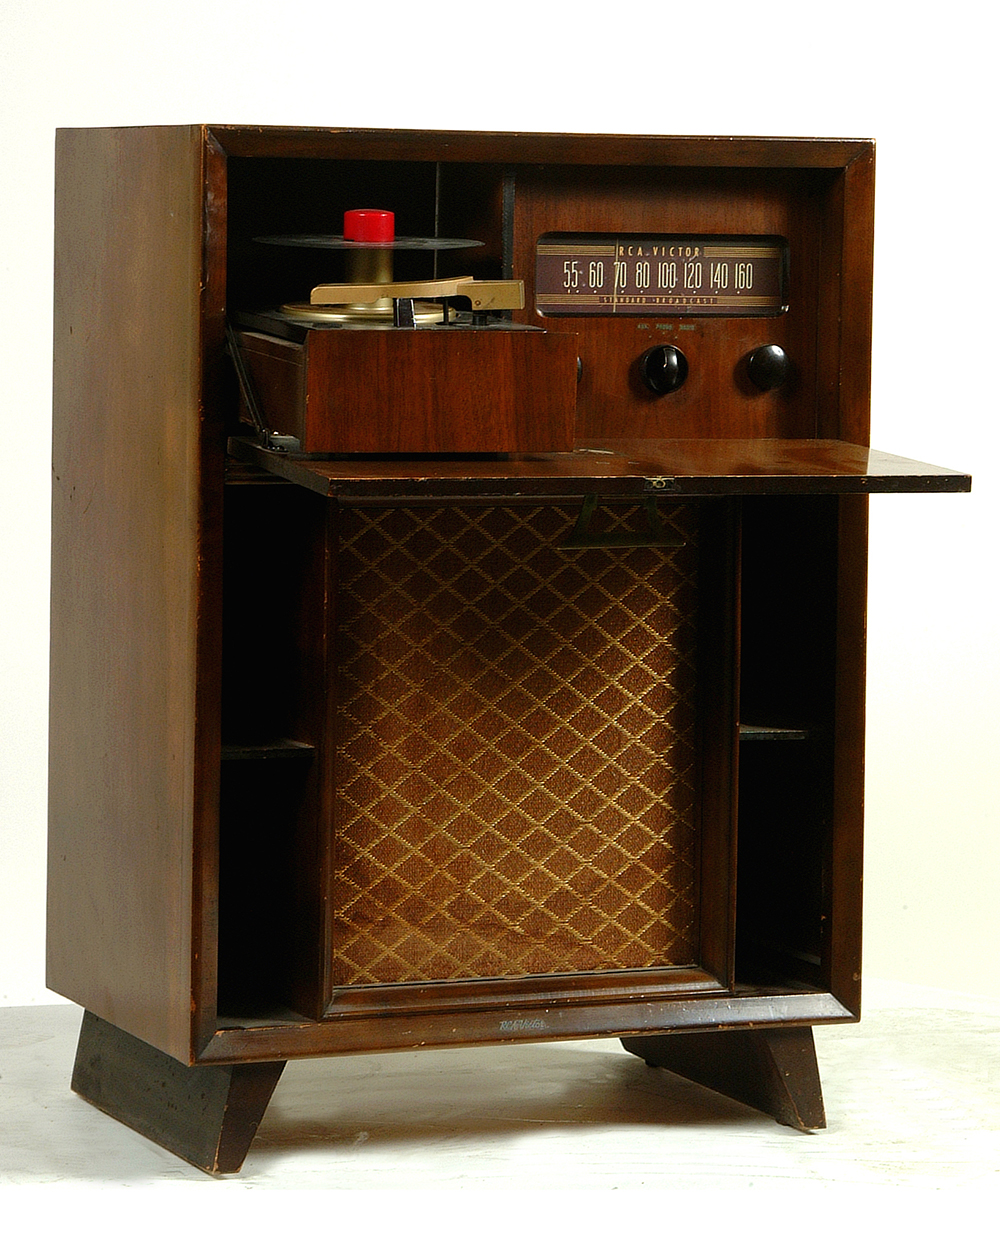 Dark wood, Montreal made, RCA radio-turn table console from 1953.